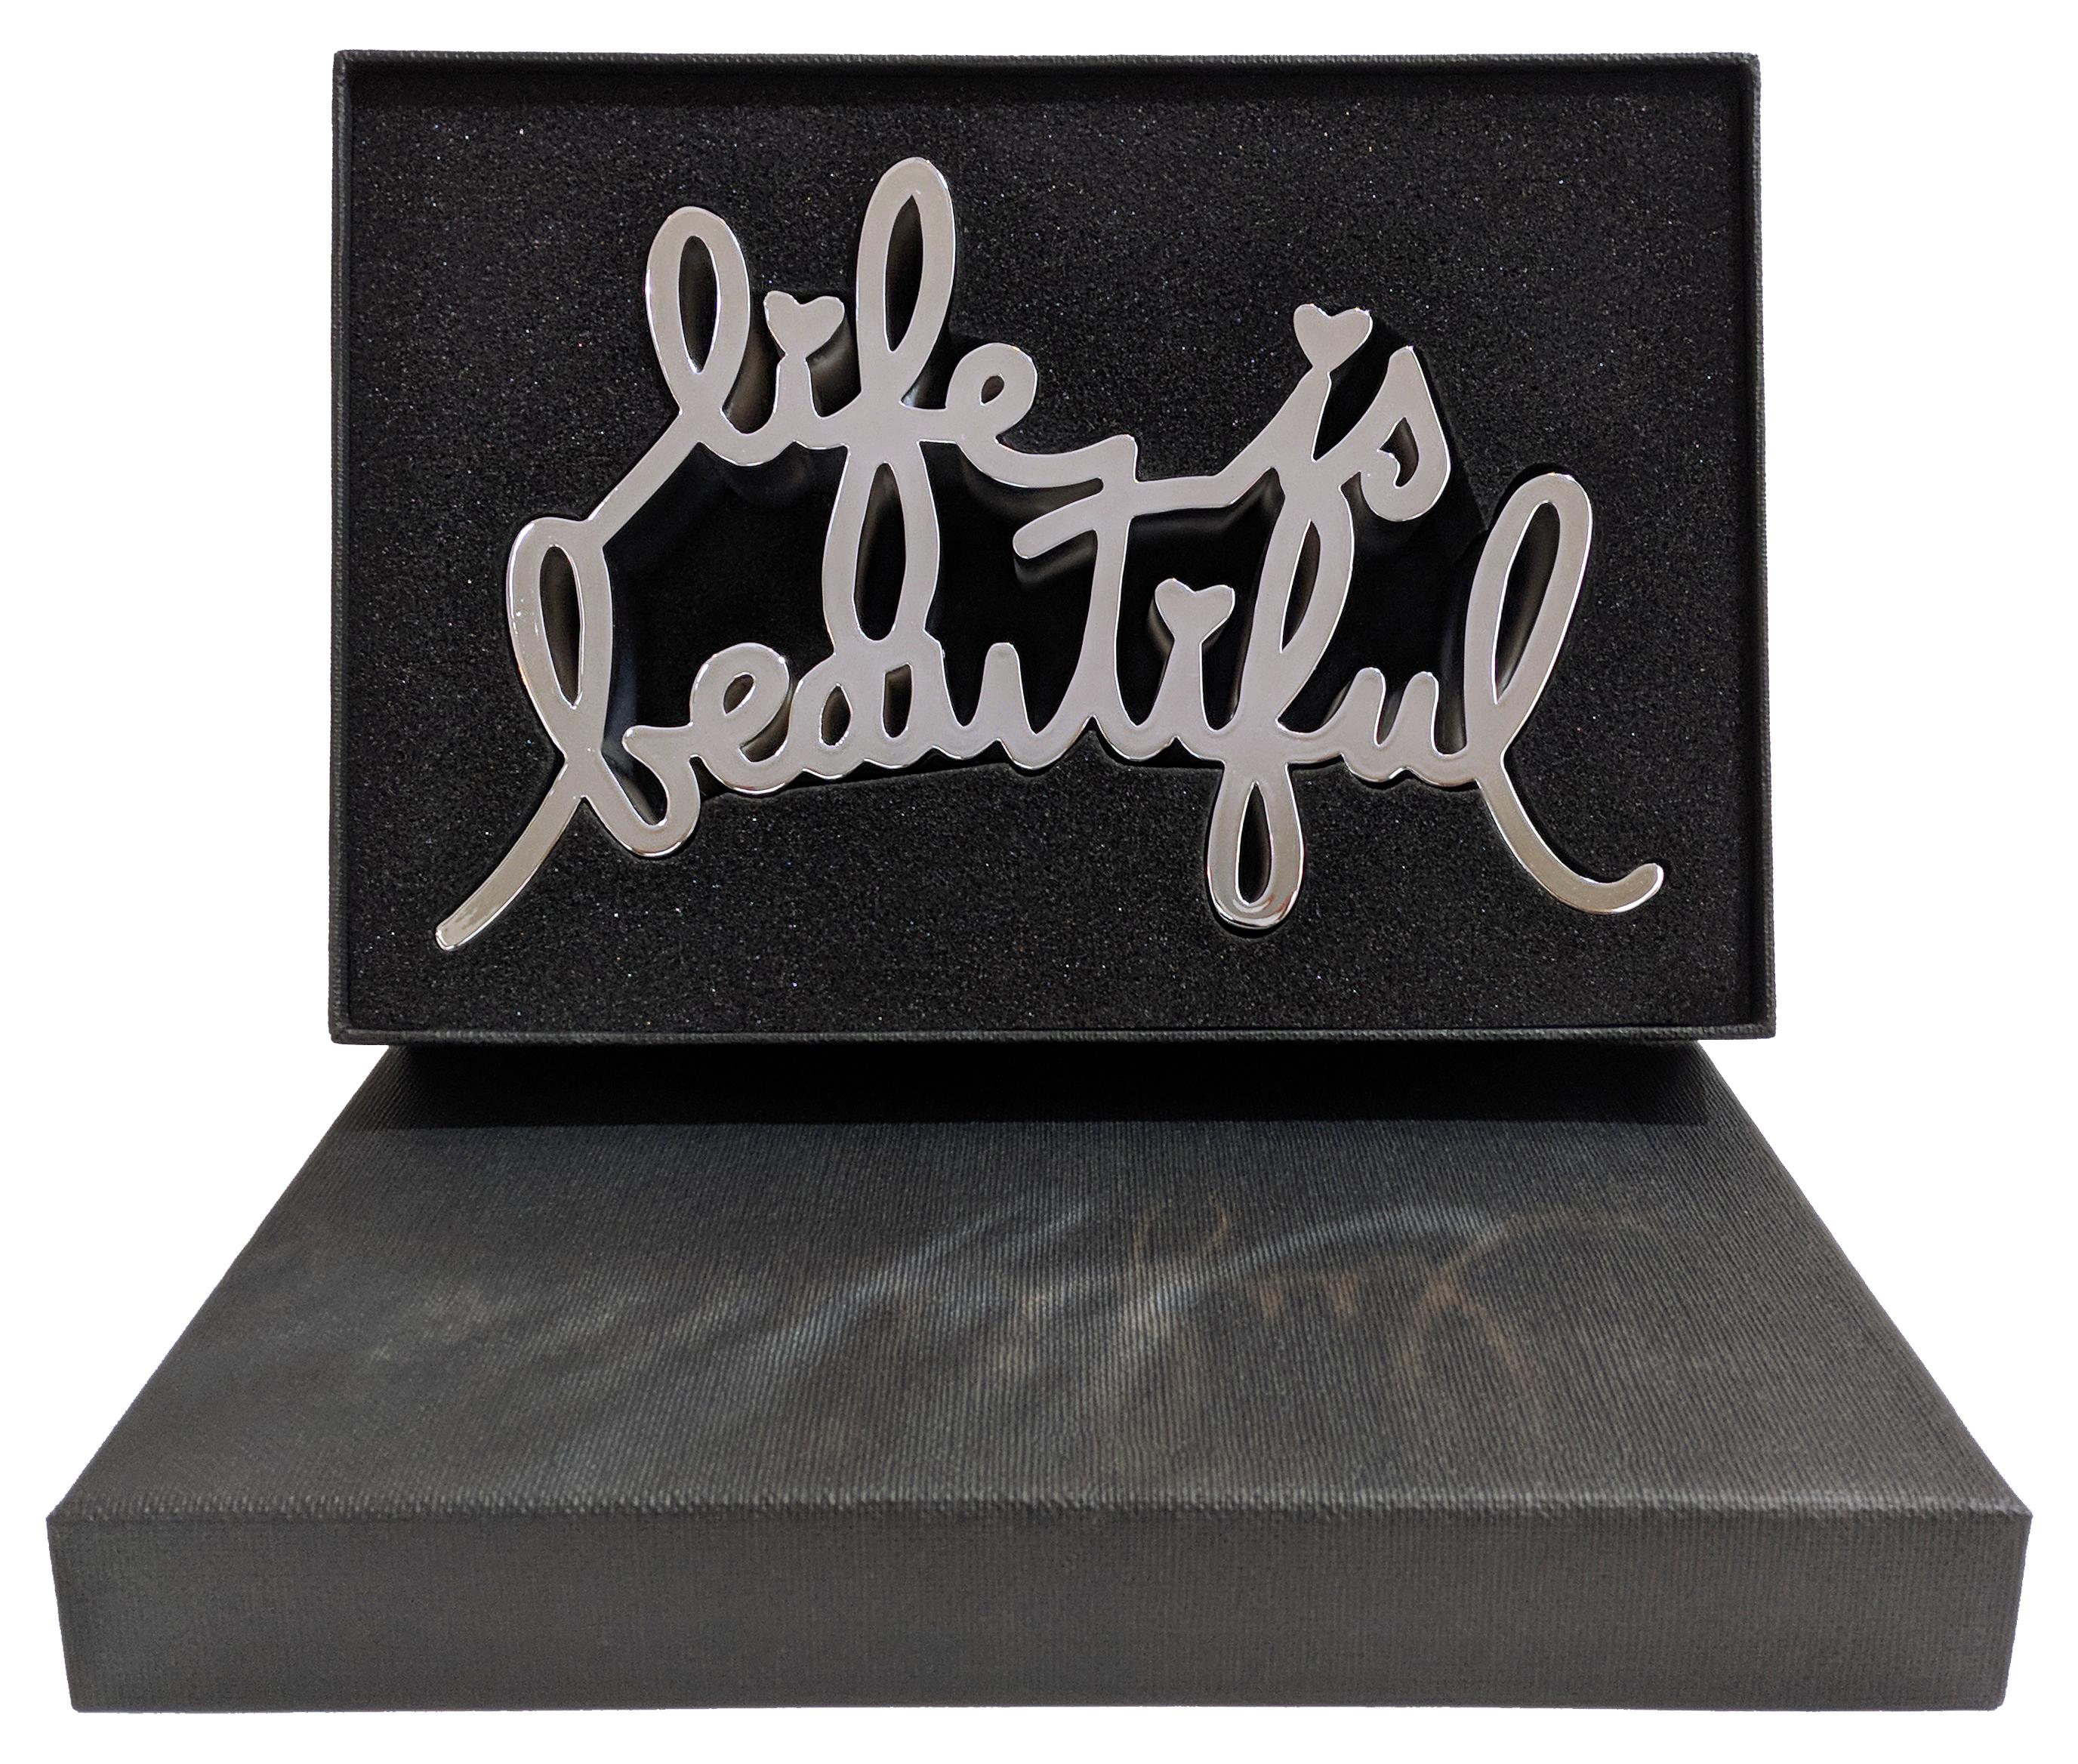 Hand signed, numbered and dated on bottom by the artist. Edition of 100.  The Life is Beautiful sculpture is made from durable cast resin, thermal coated with reflective metallic finish. Includes original box.   Artwork is in excellent condition.